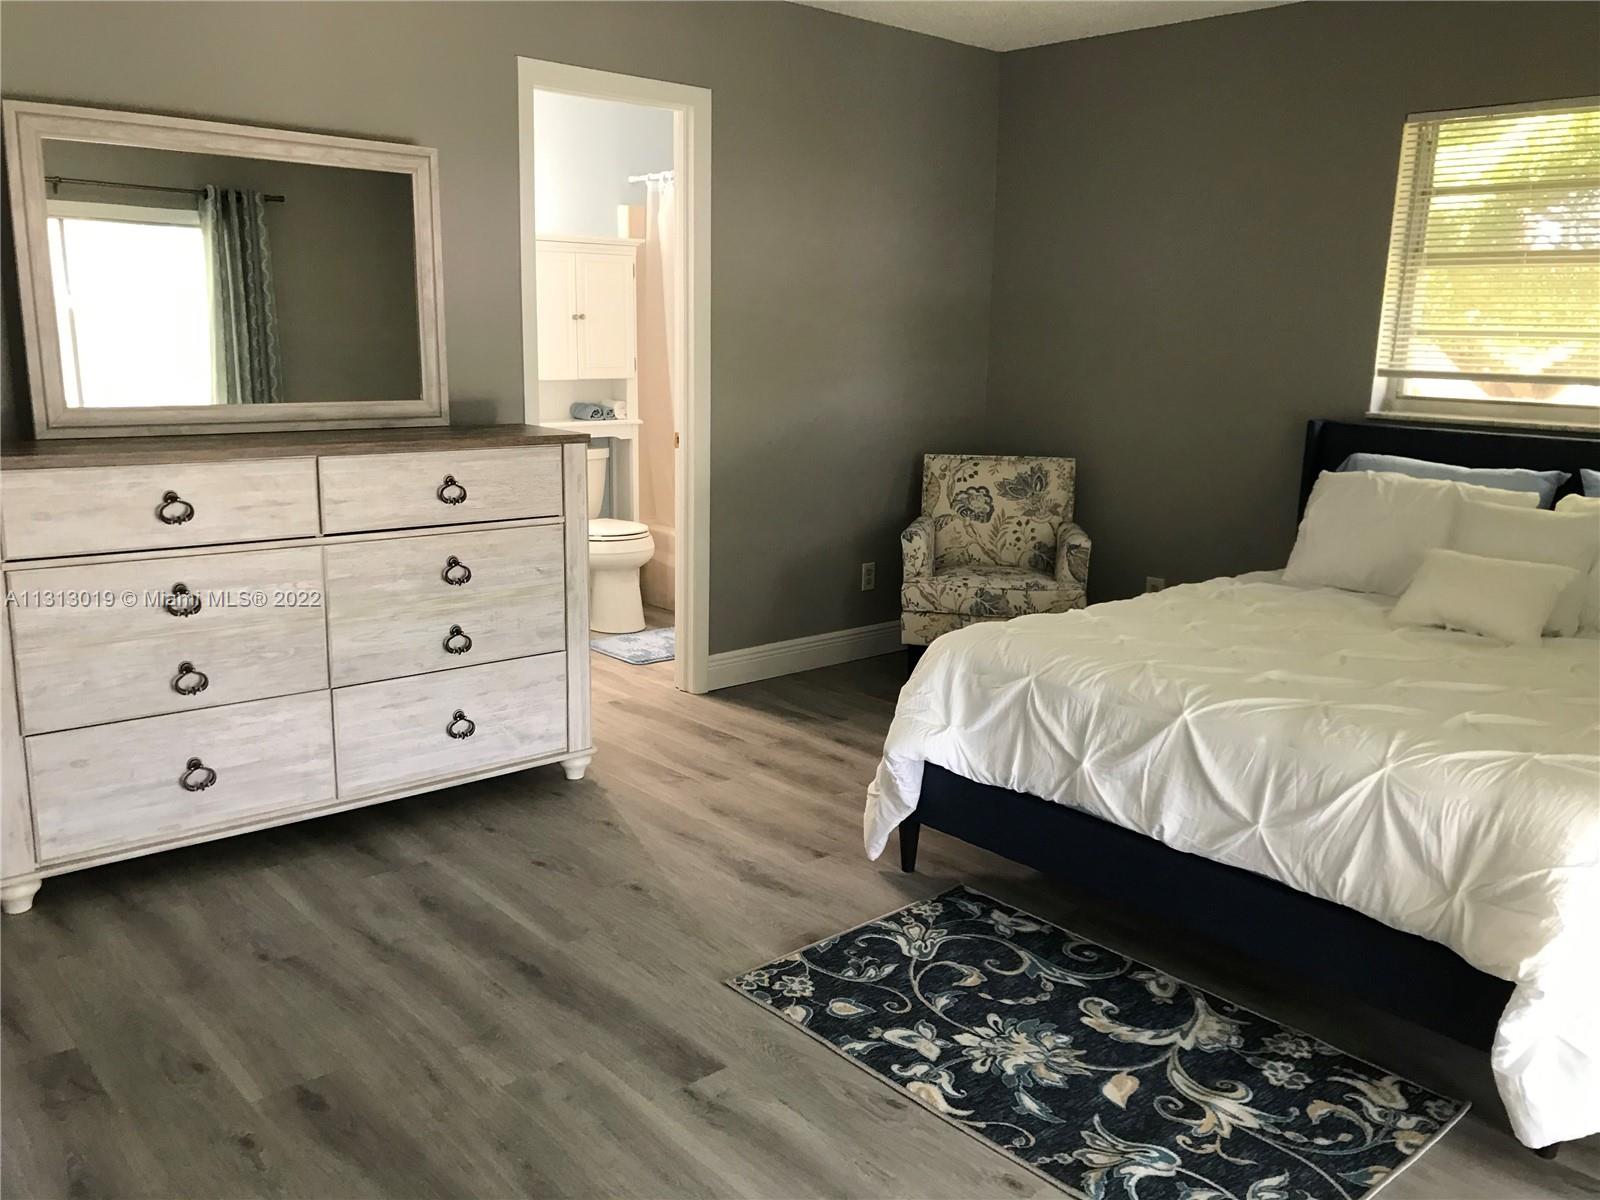 a bedroom with a bed and a mirror on dresser